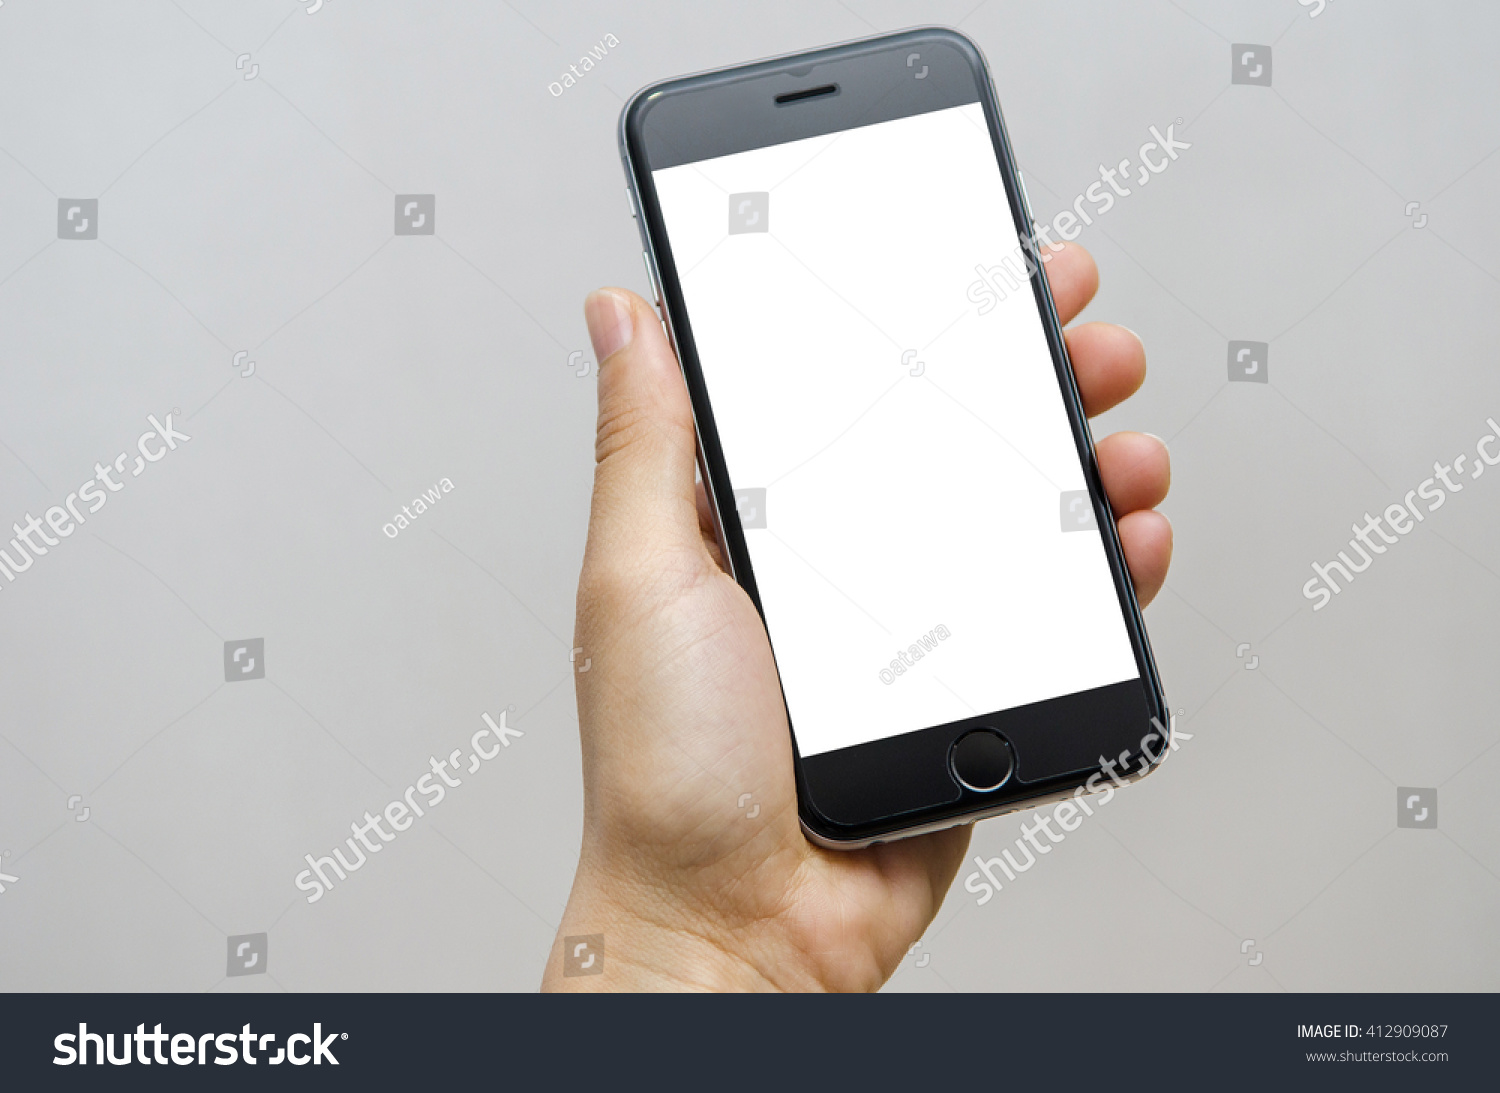 Close up hand holding black phone on white clipping path inside. #412909087